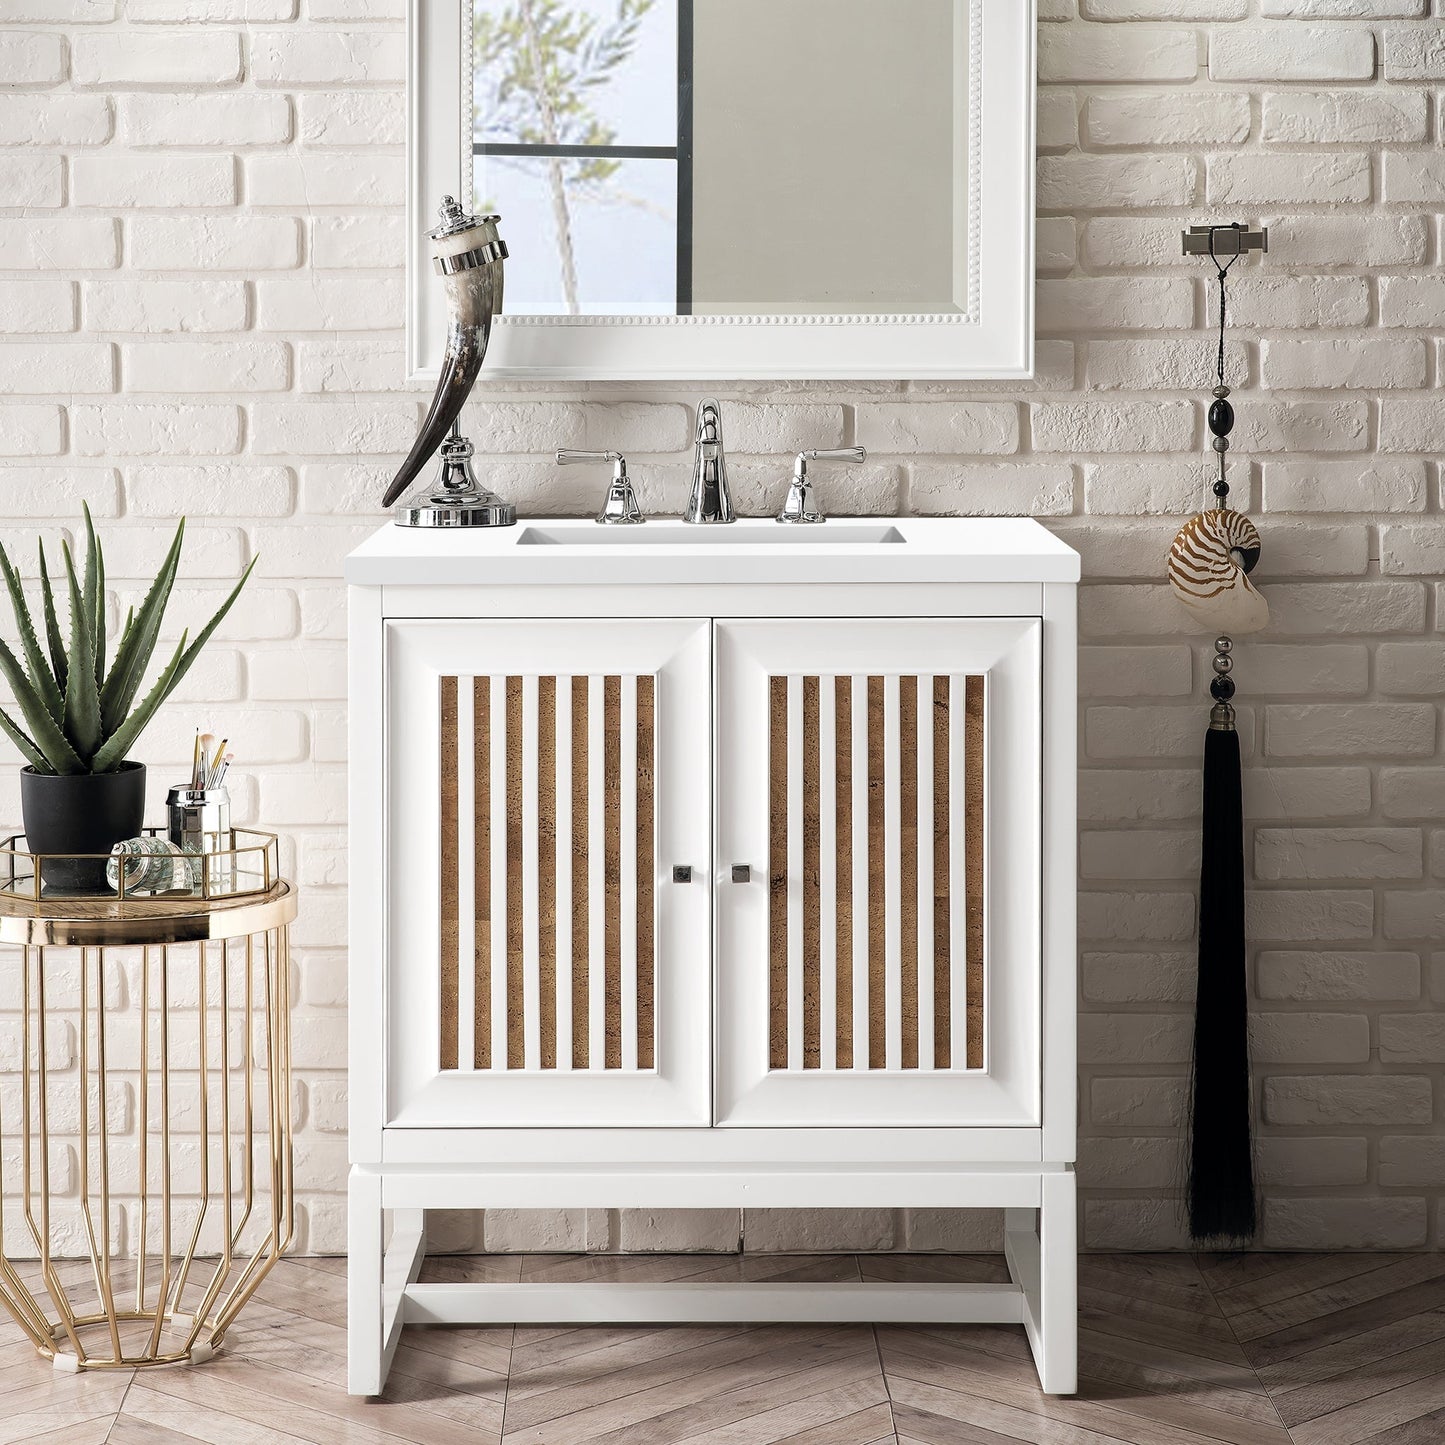 The Athens Collection – James Martin Vanities